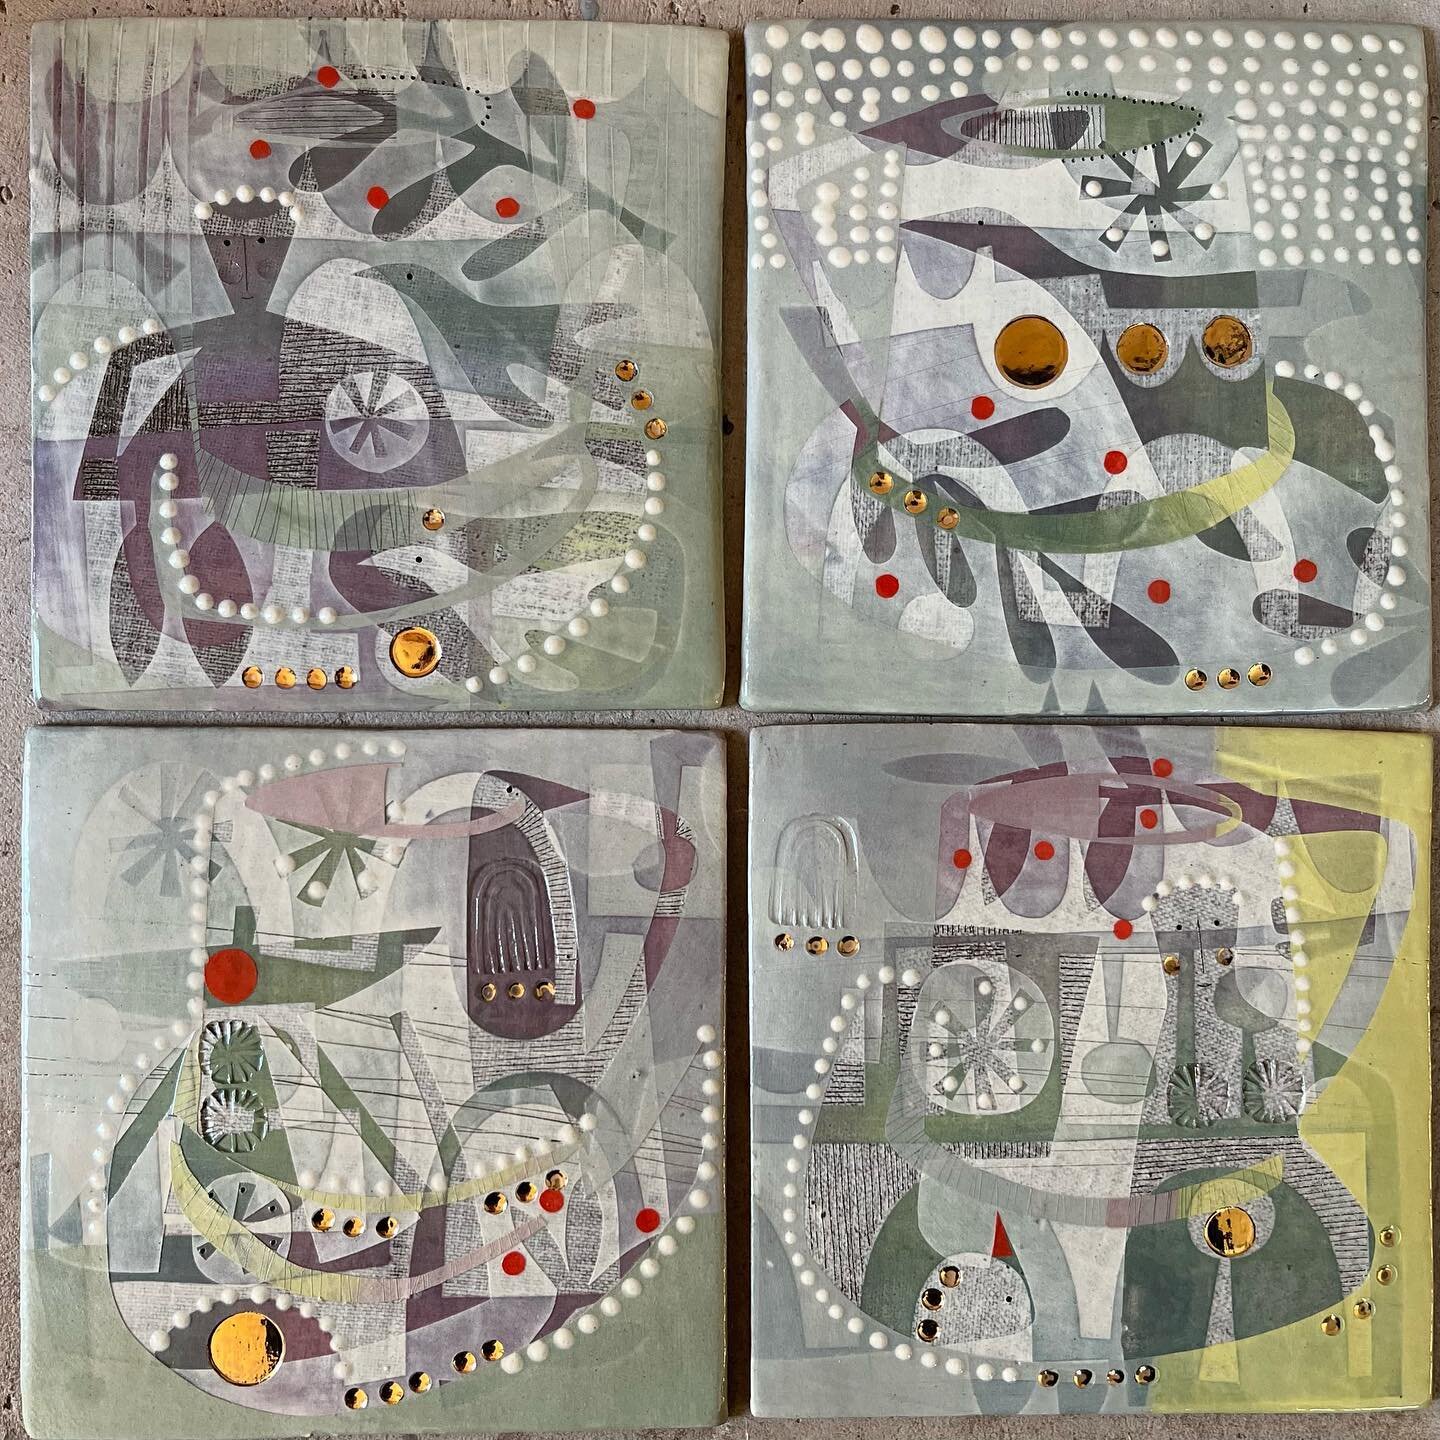 Wrapping tiles in the morning sunshine ready for posting. 
Visit our website to shop tiles and read our blog about what inspired them.

#carryfarm
#hayshedgallery 

#handmadetiles 
#ceramics 
#interiordesign 
#illustration
#folkart
#craftscotland
#ma